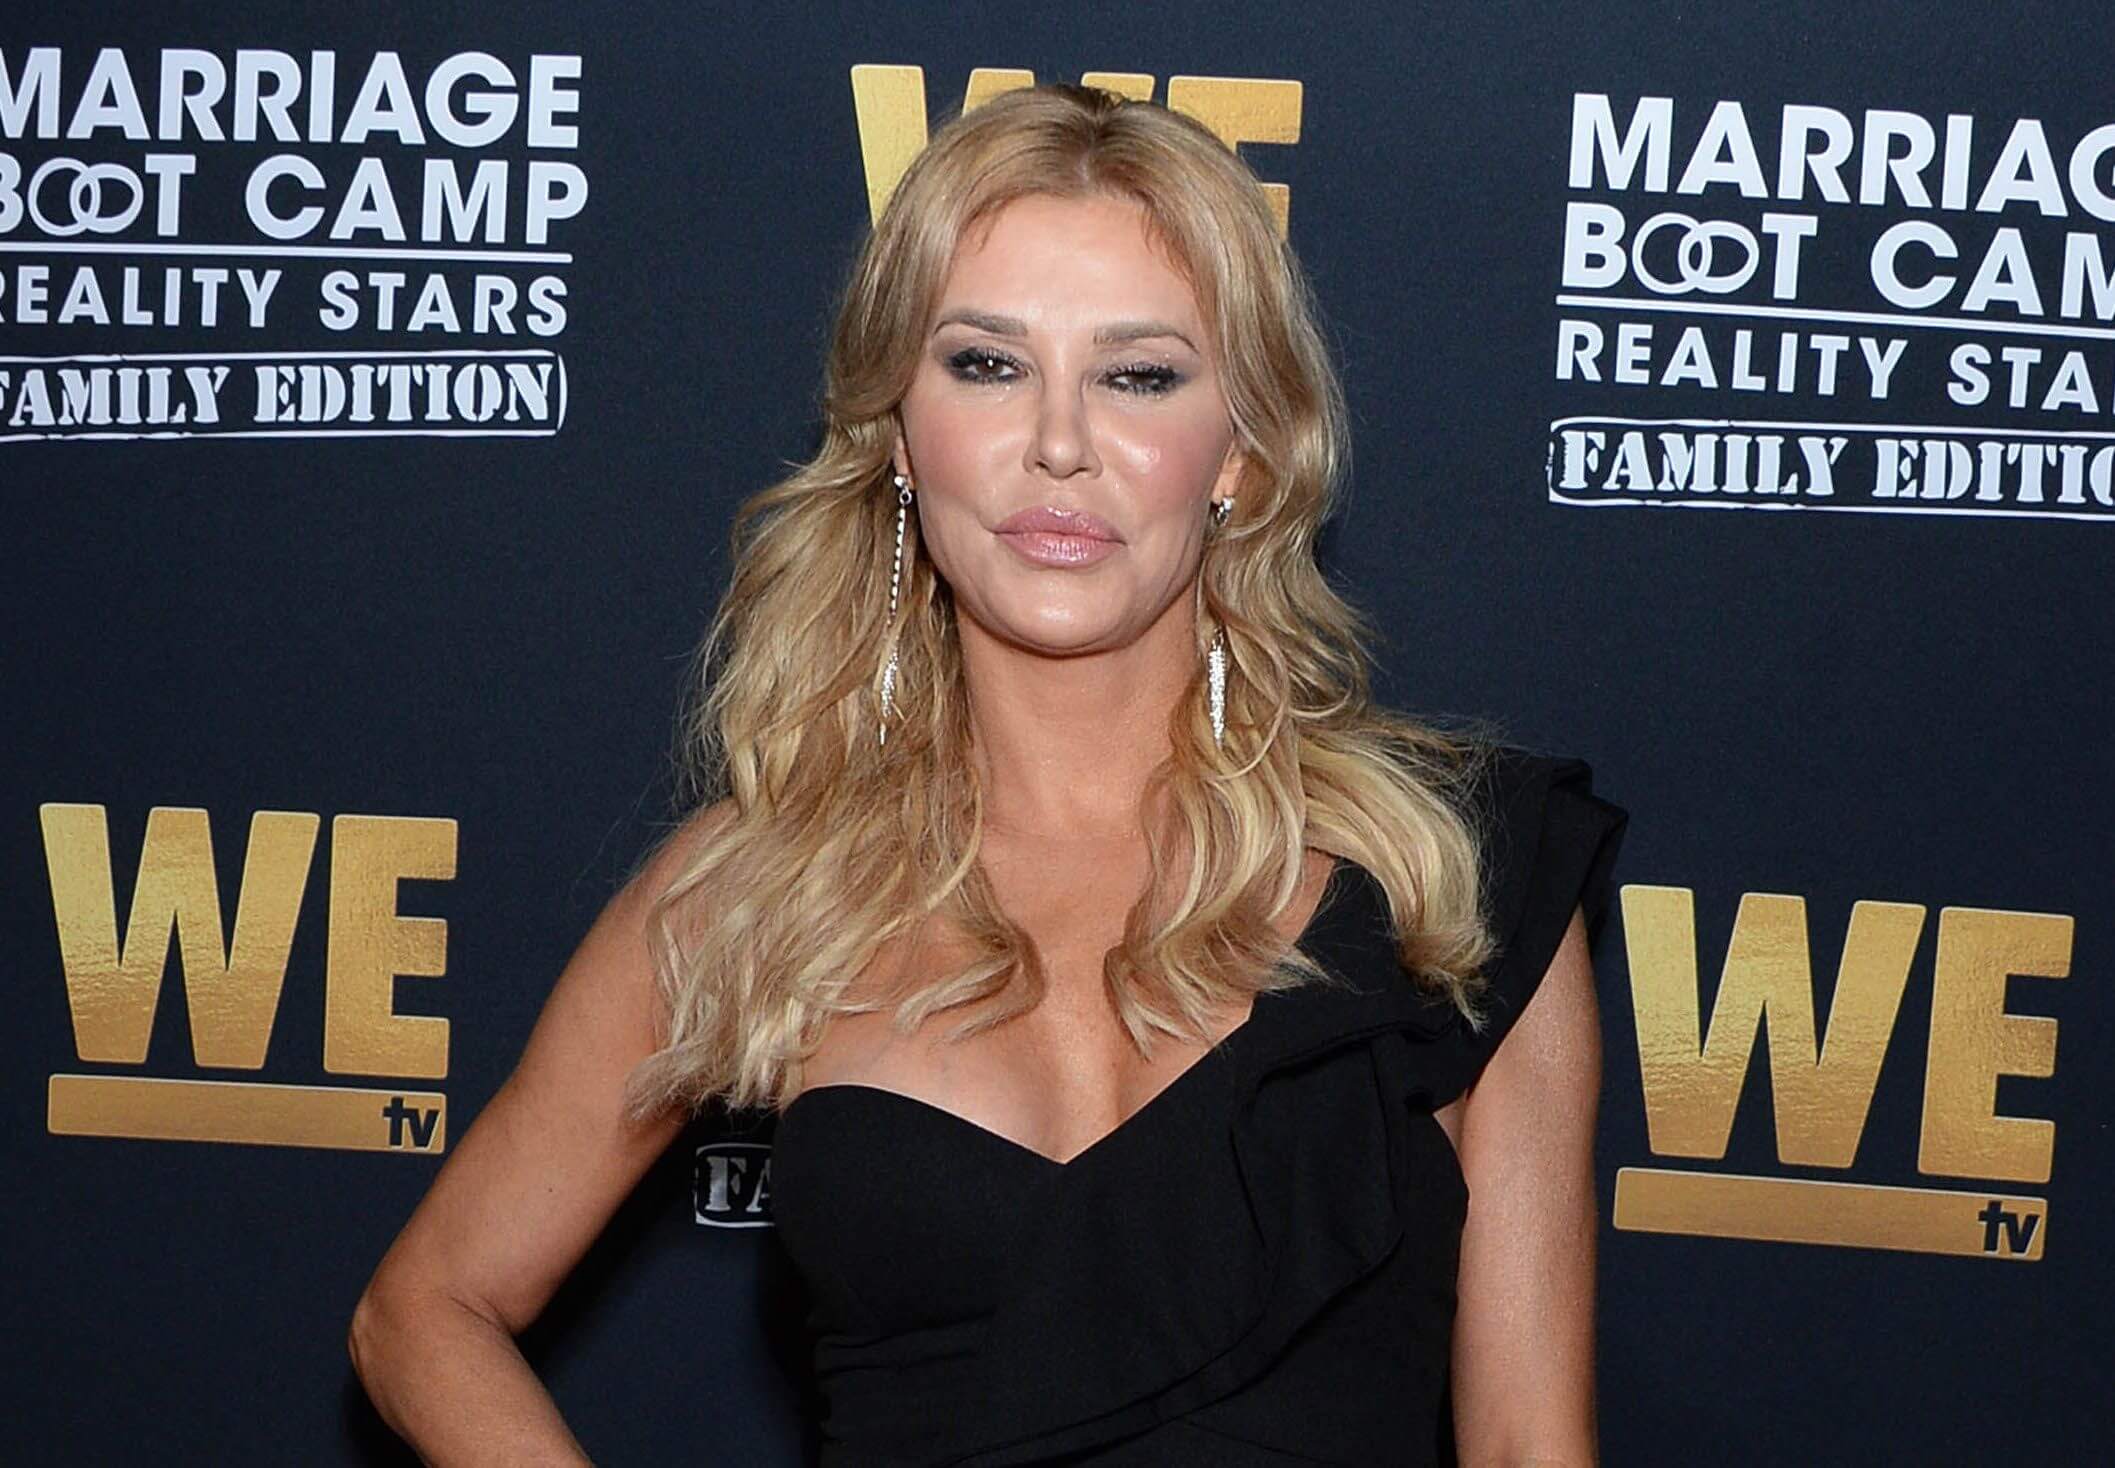 Brandi Glanville Reveals A ‘RHOBH’ Star Is Refusing to Film After An Intense Fight!